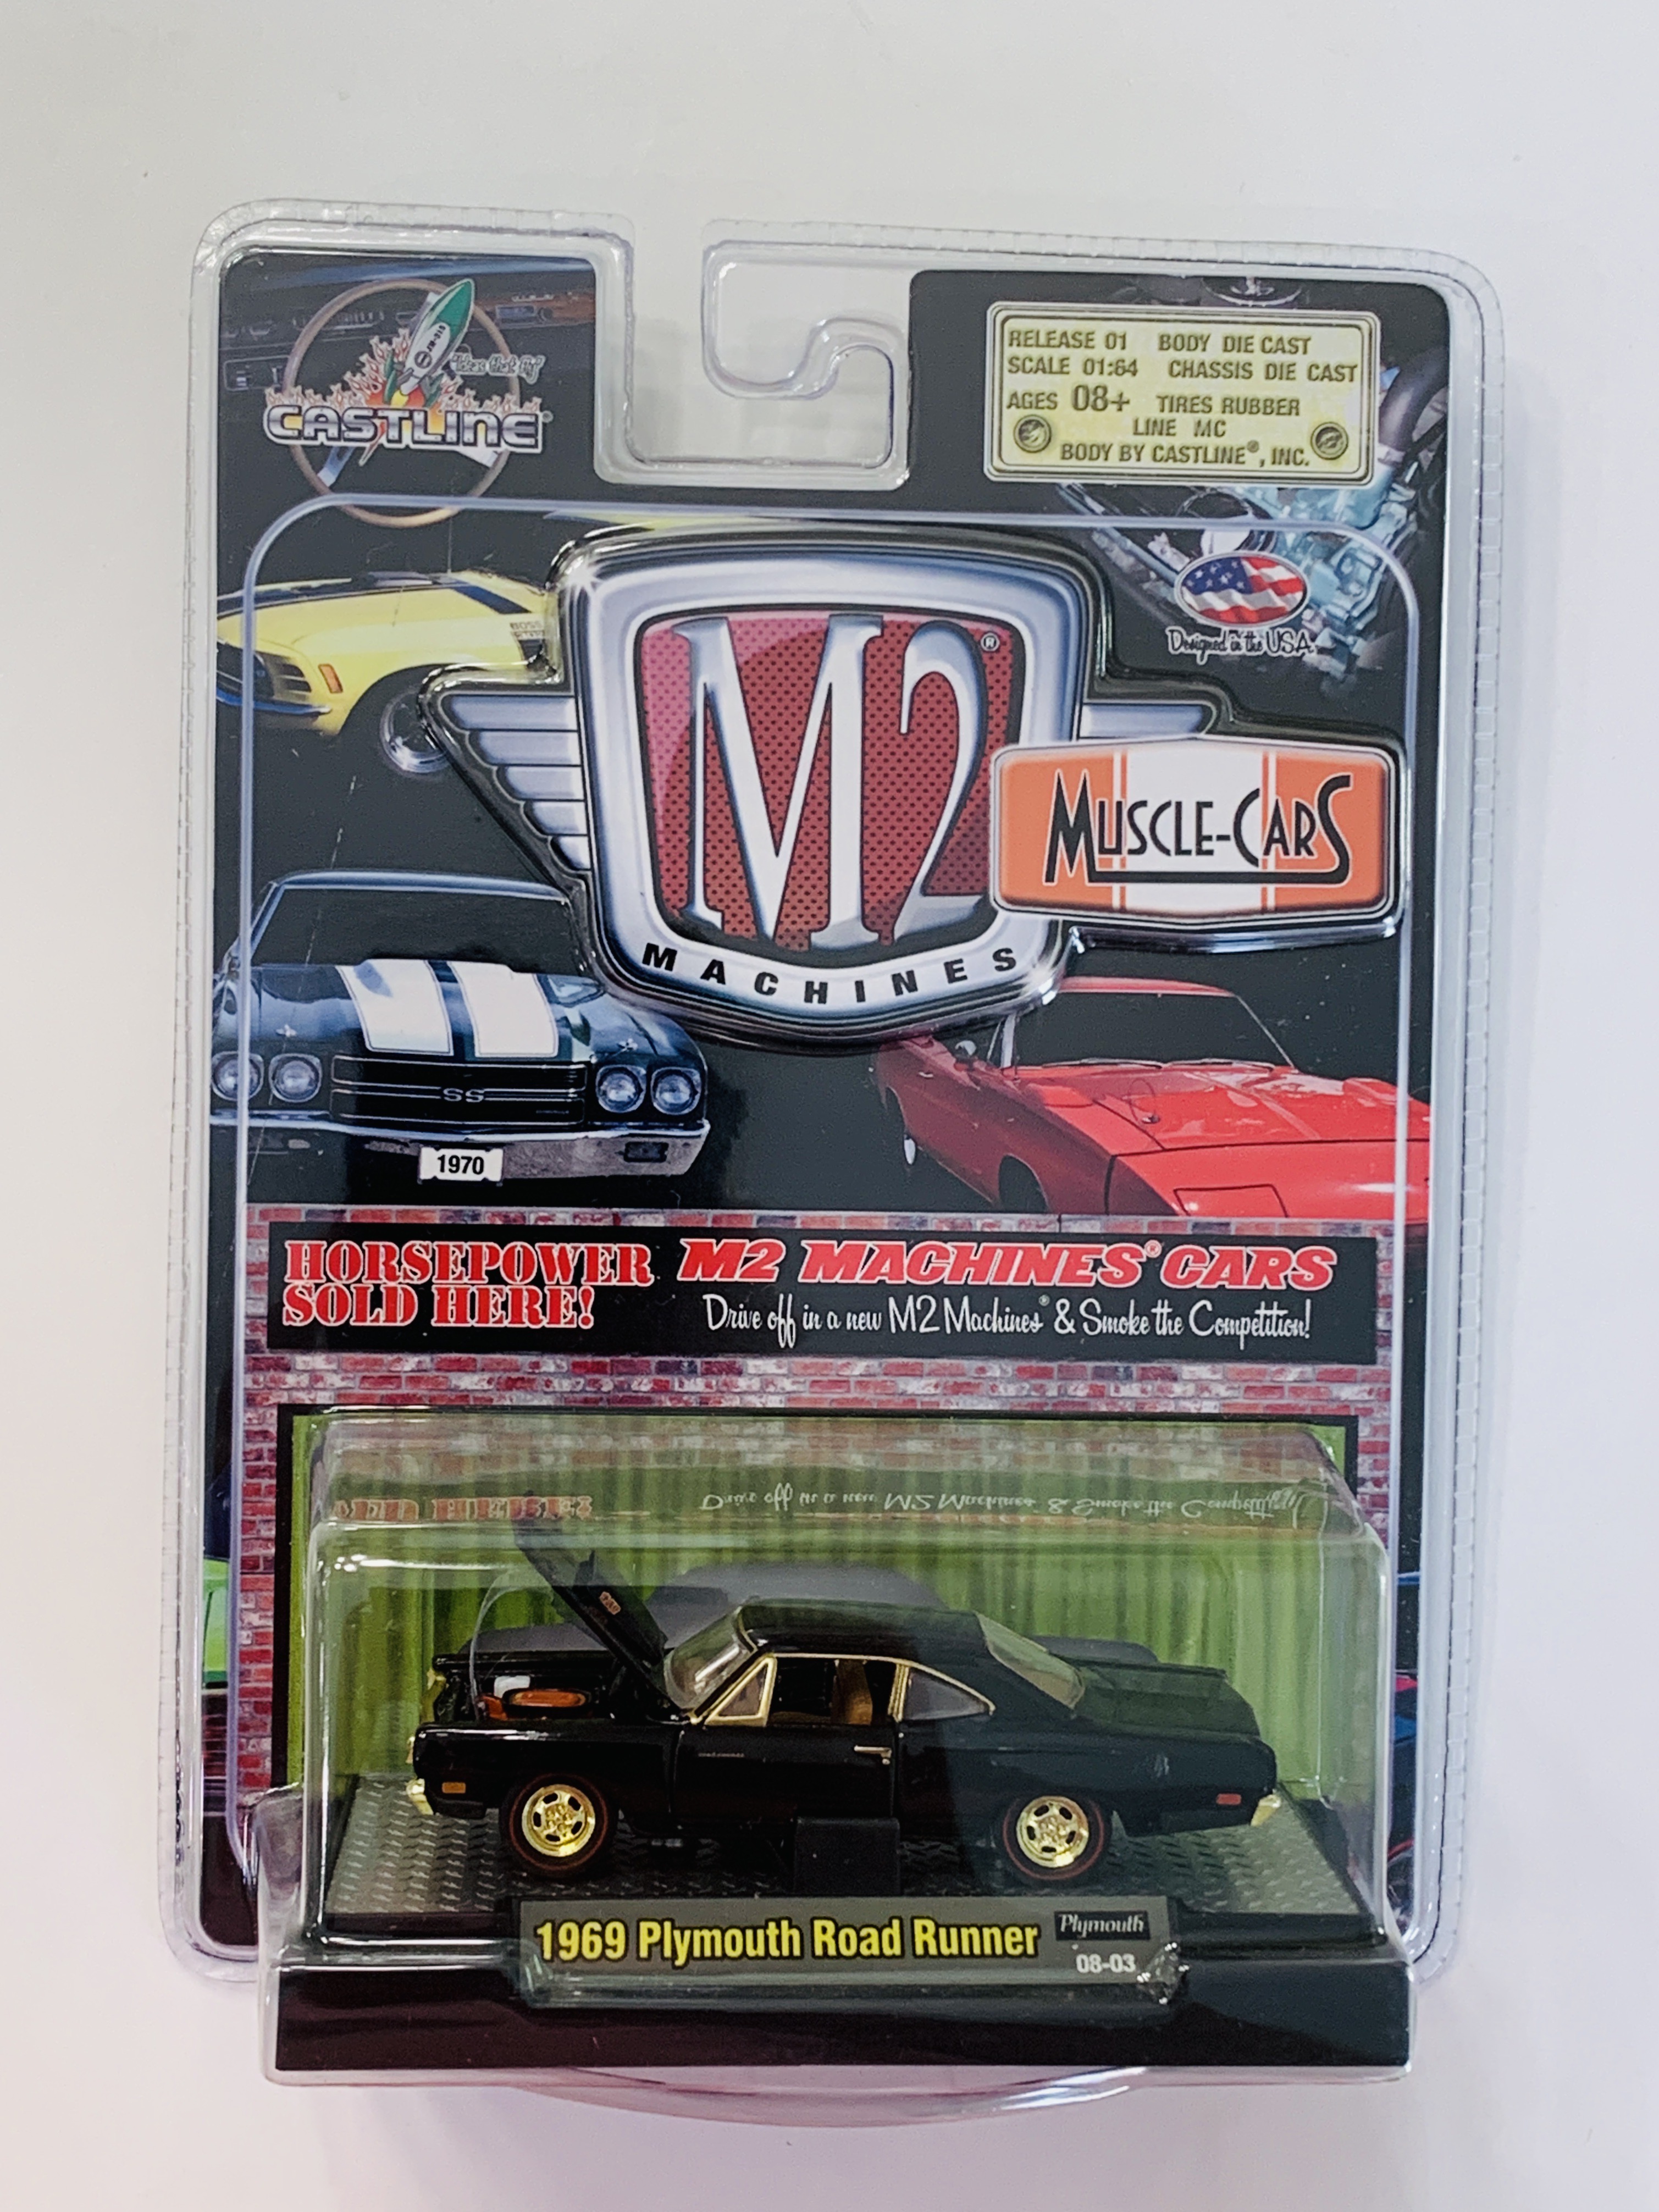 M2 Machines Muscle-Cars 1969 Plymouth Road Runner Chase R01